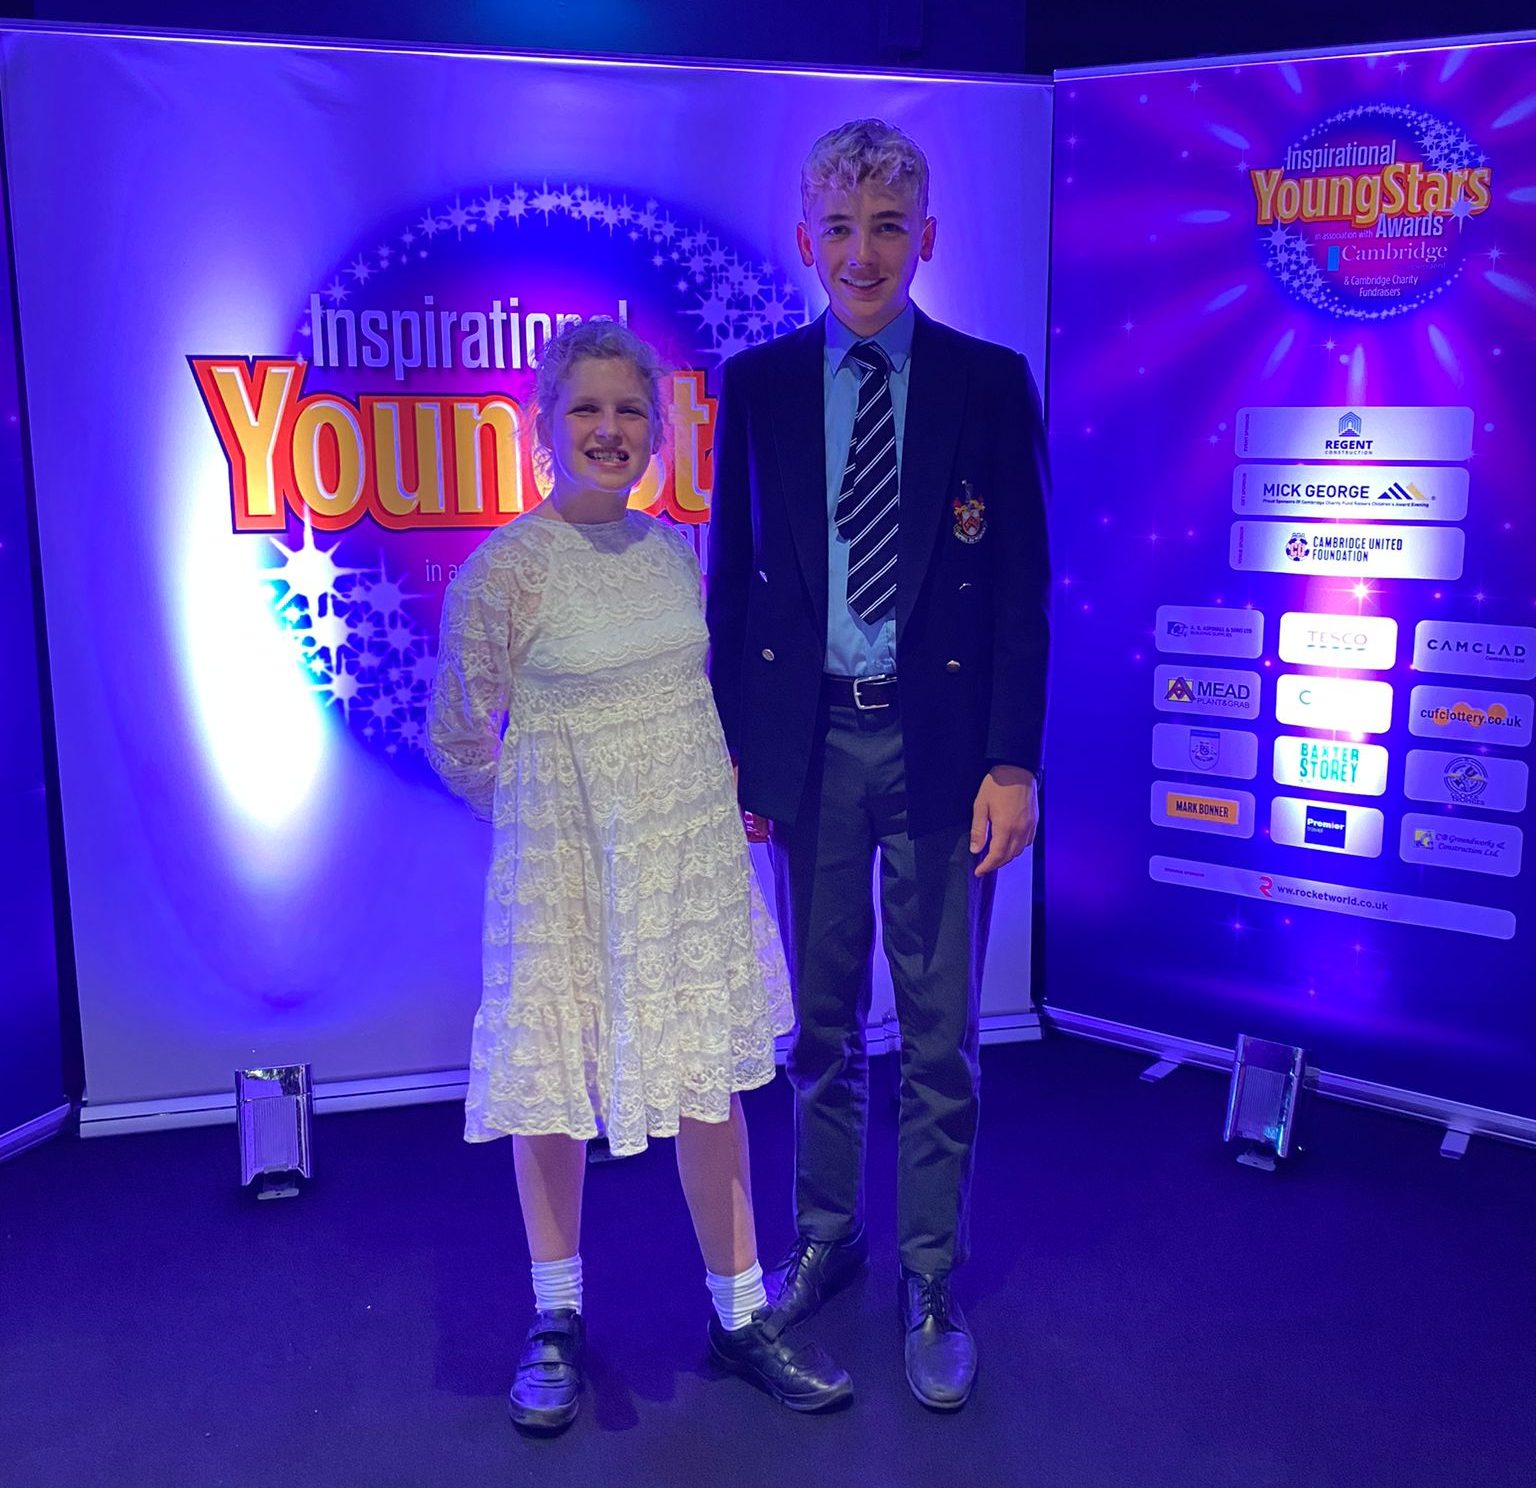 Young Ambassadors Mimi and Flint Clarke winning an award for their support of Tom's Trust. Flint is wearing a suit and tie and Mimi is wearing a white dress and they are on a stage with blue lighting in the background.